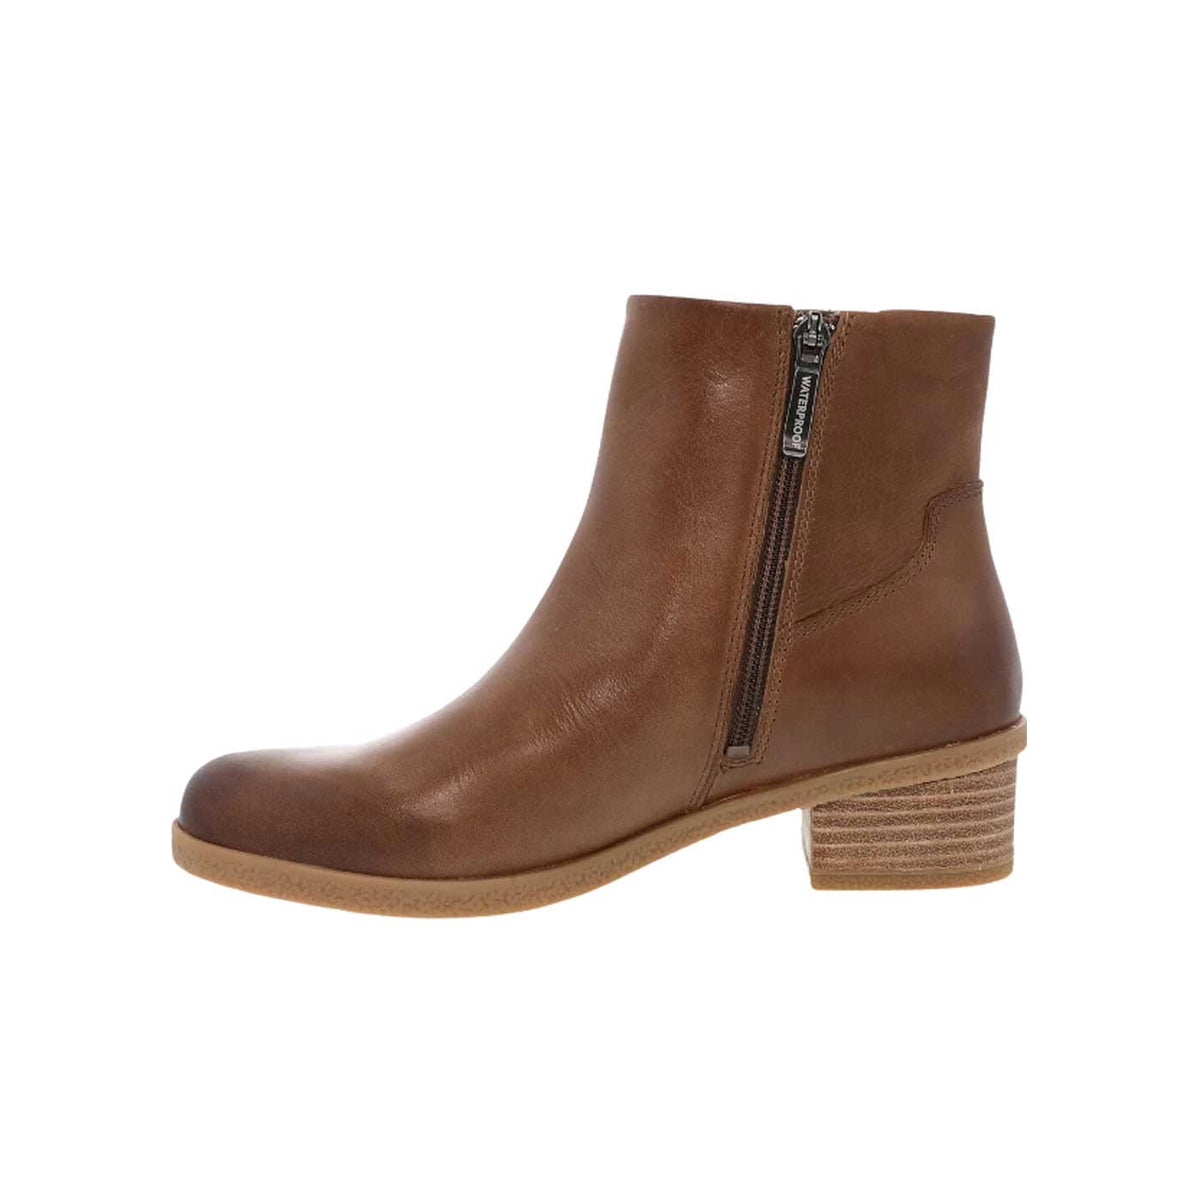 A Dansko Daisie Tan Burnished ankle boot with a side zipper and a low, stacked heel, featuring a leather-covered footbed, isolated on a white background.